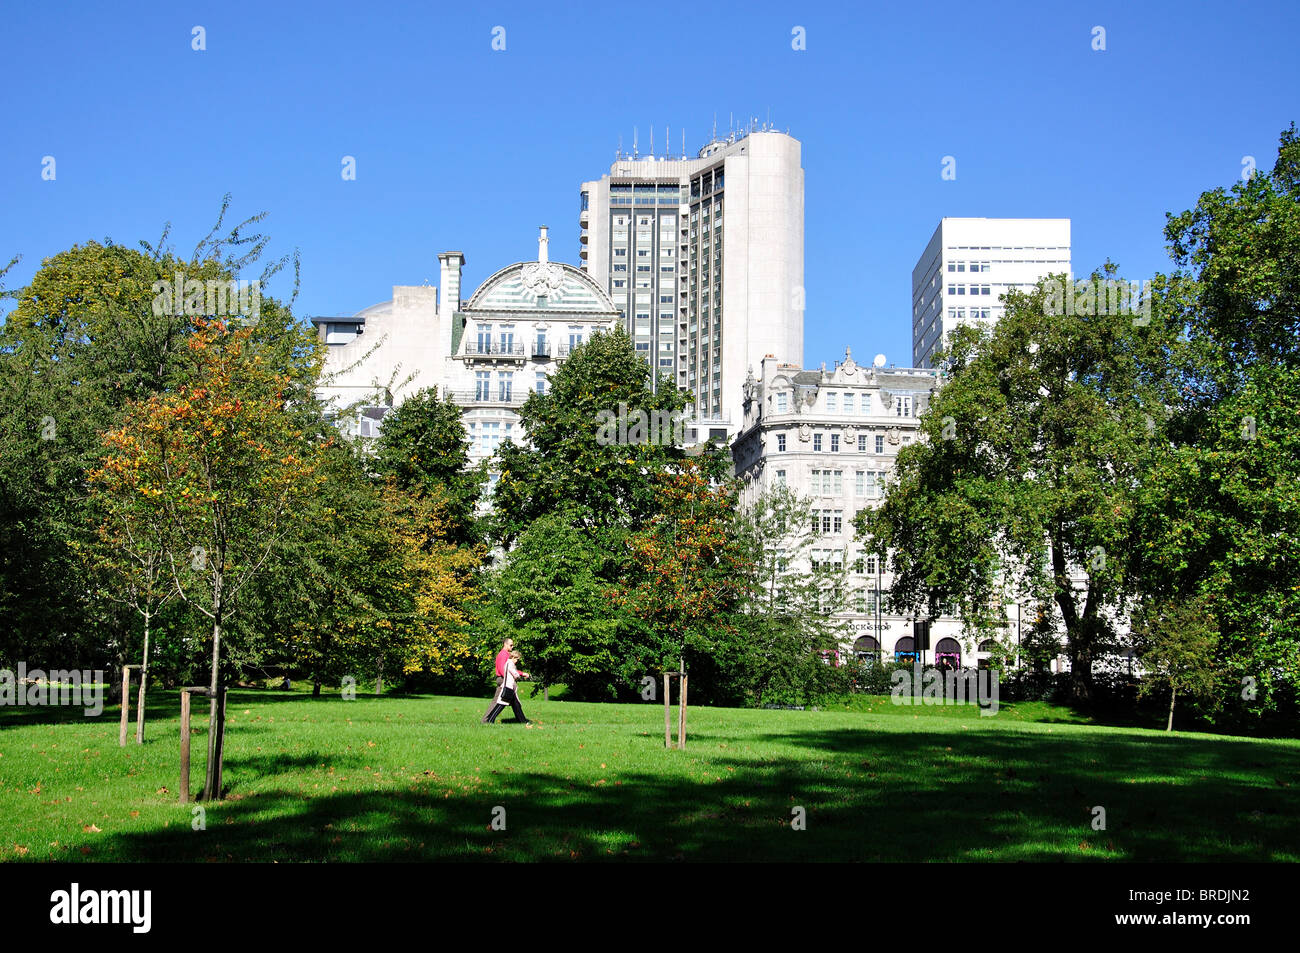 Il Green Park, City of Westminster, Greater London, England, Regno Unito Foto Stock